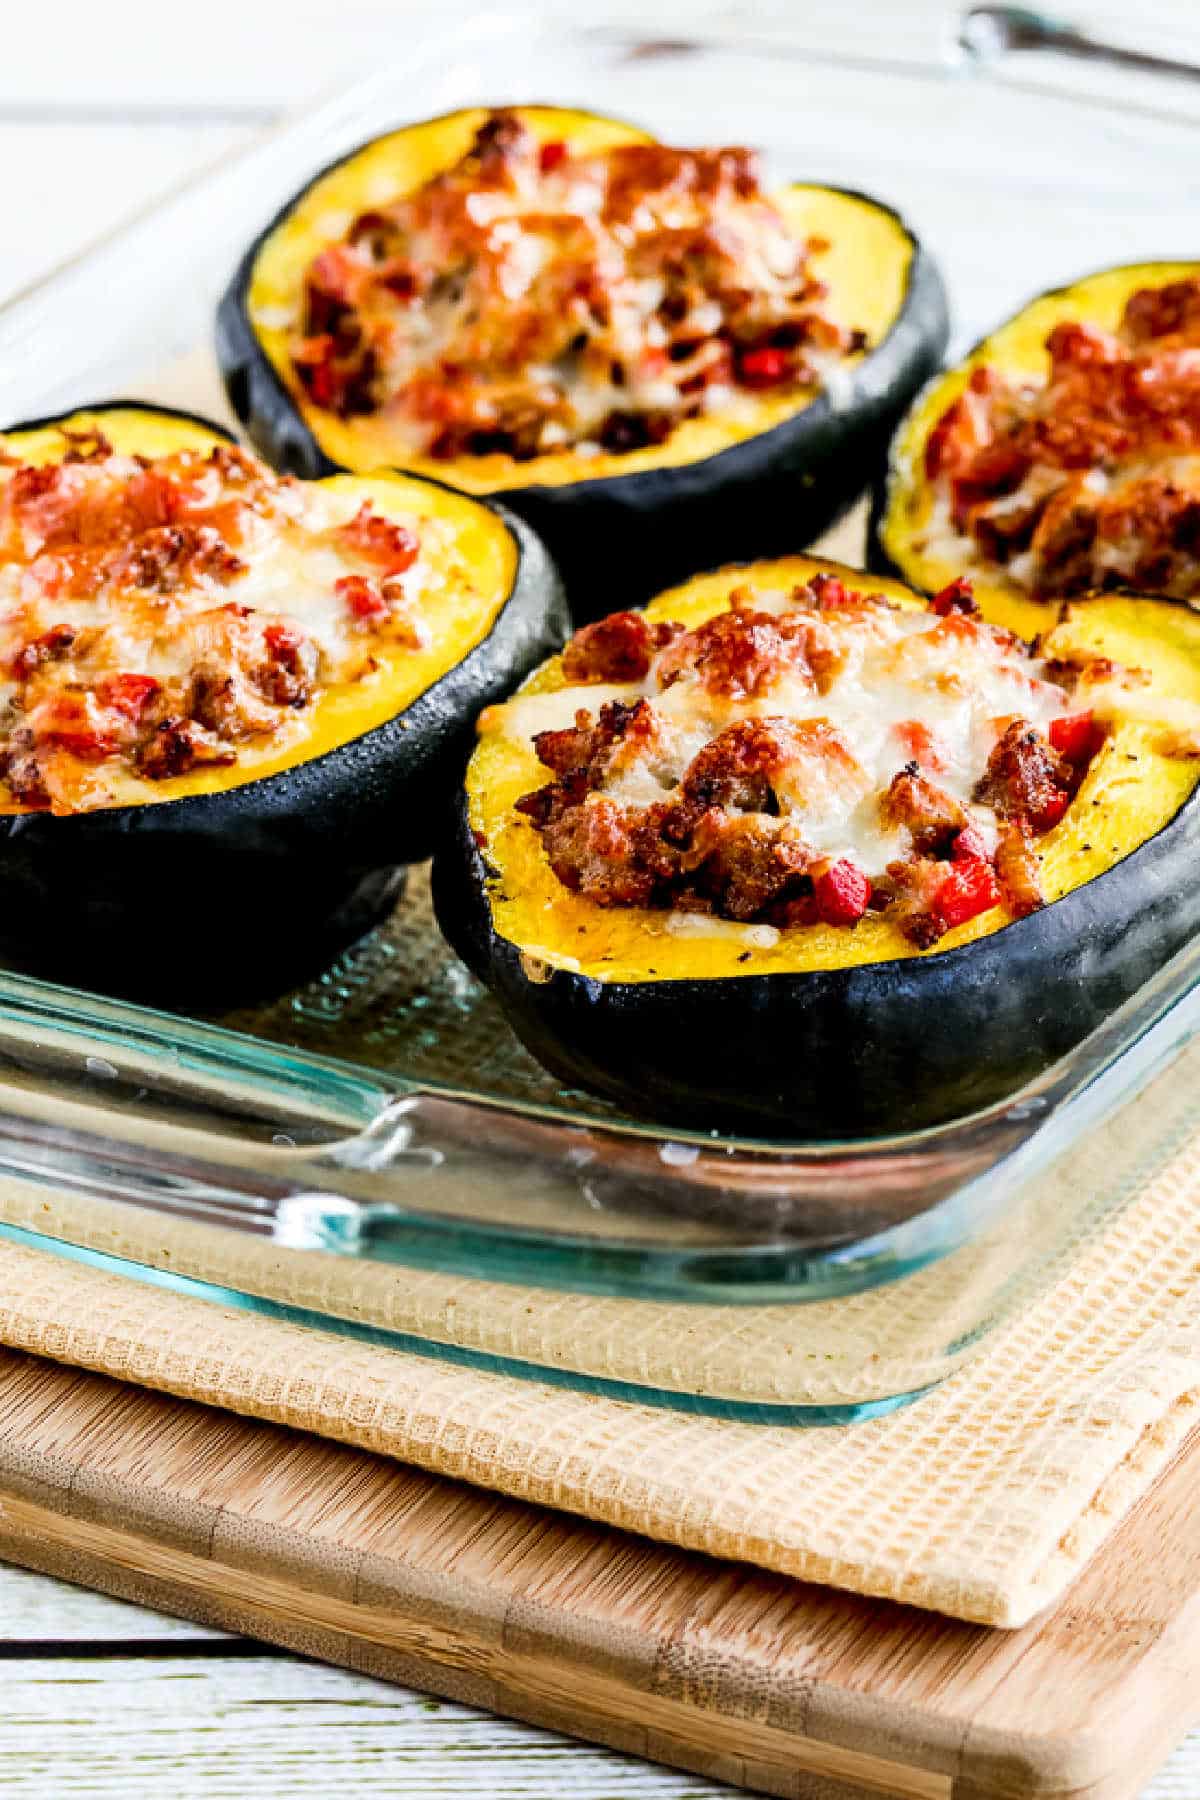 Sausage stuffed with acorn squash in a baking dish on a cutting board